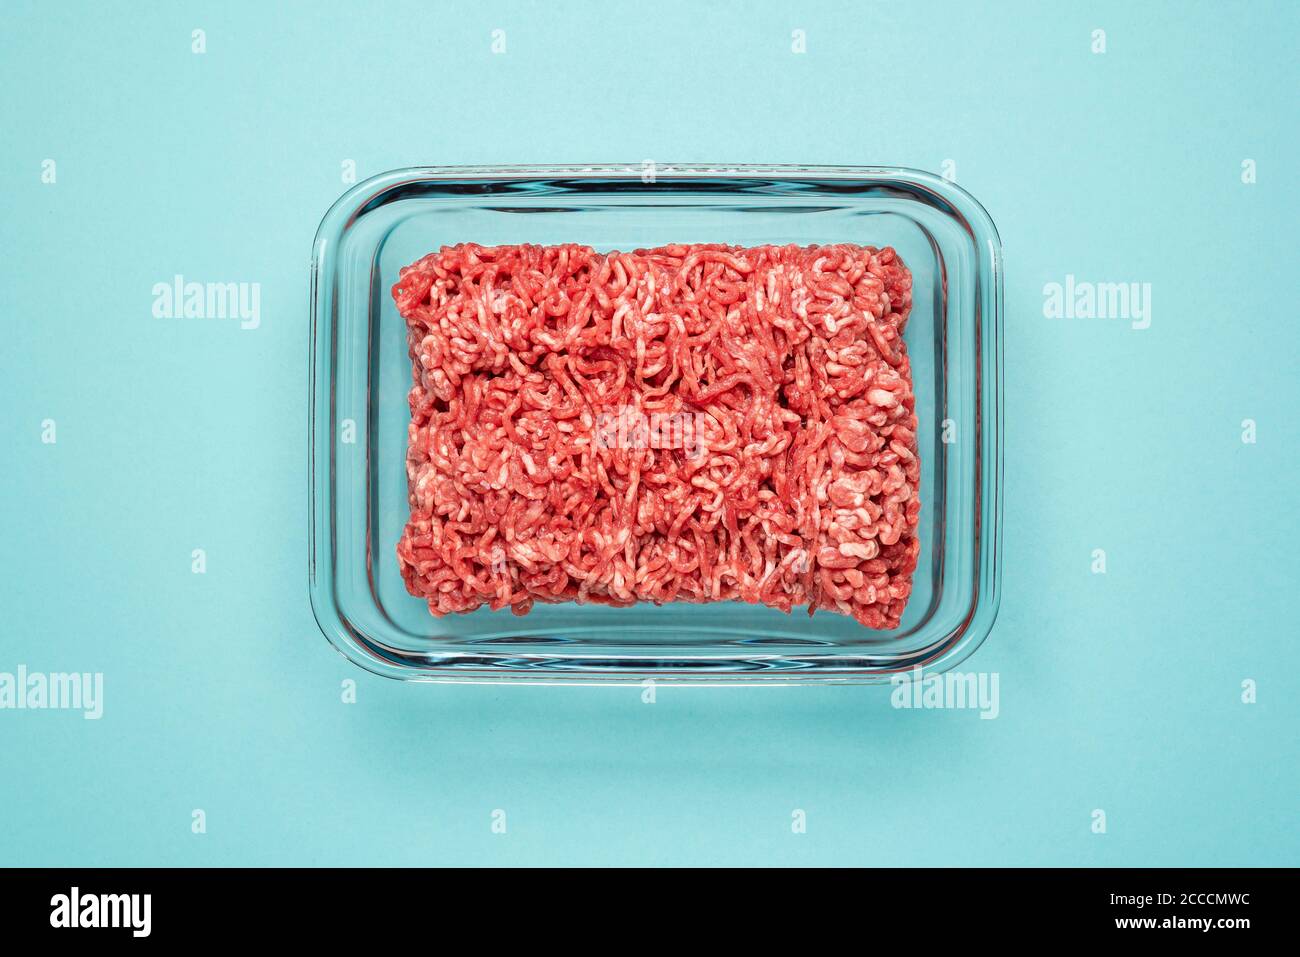 Above view with ground beef in a glass food container on a blue colored table. Ground beef in a glass dish isolated on a blue background. Stock Photo